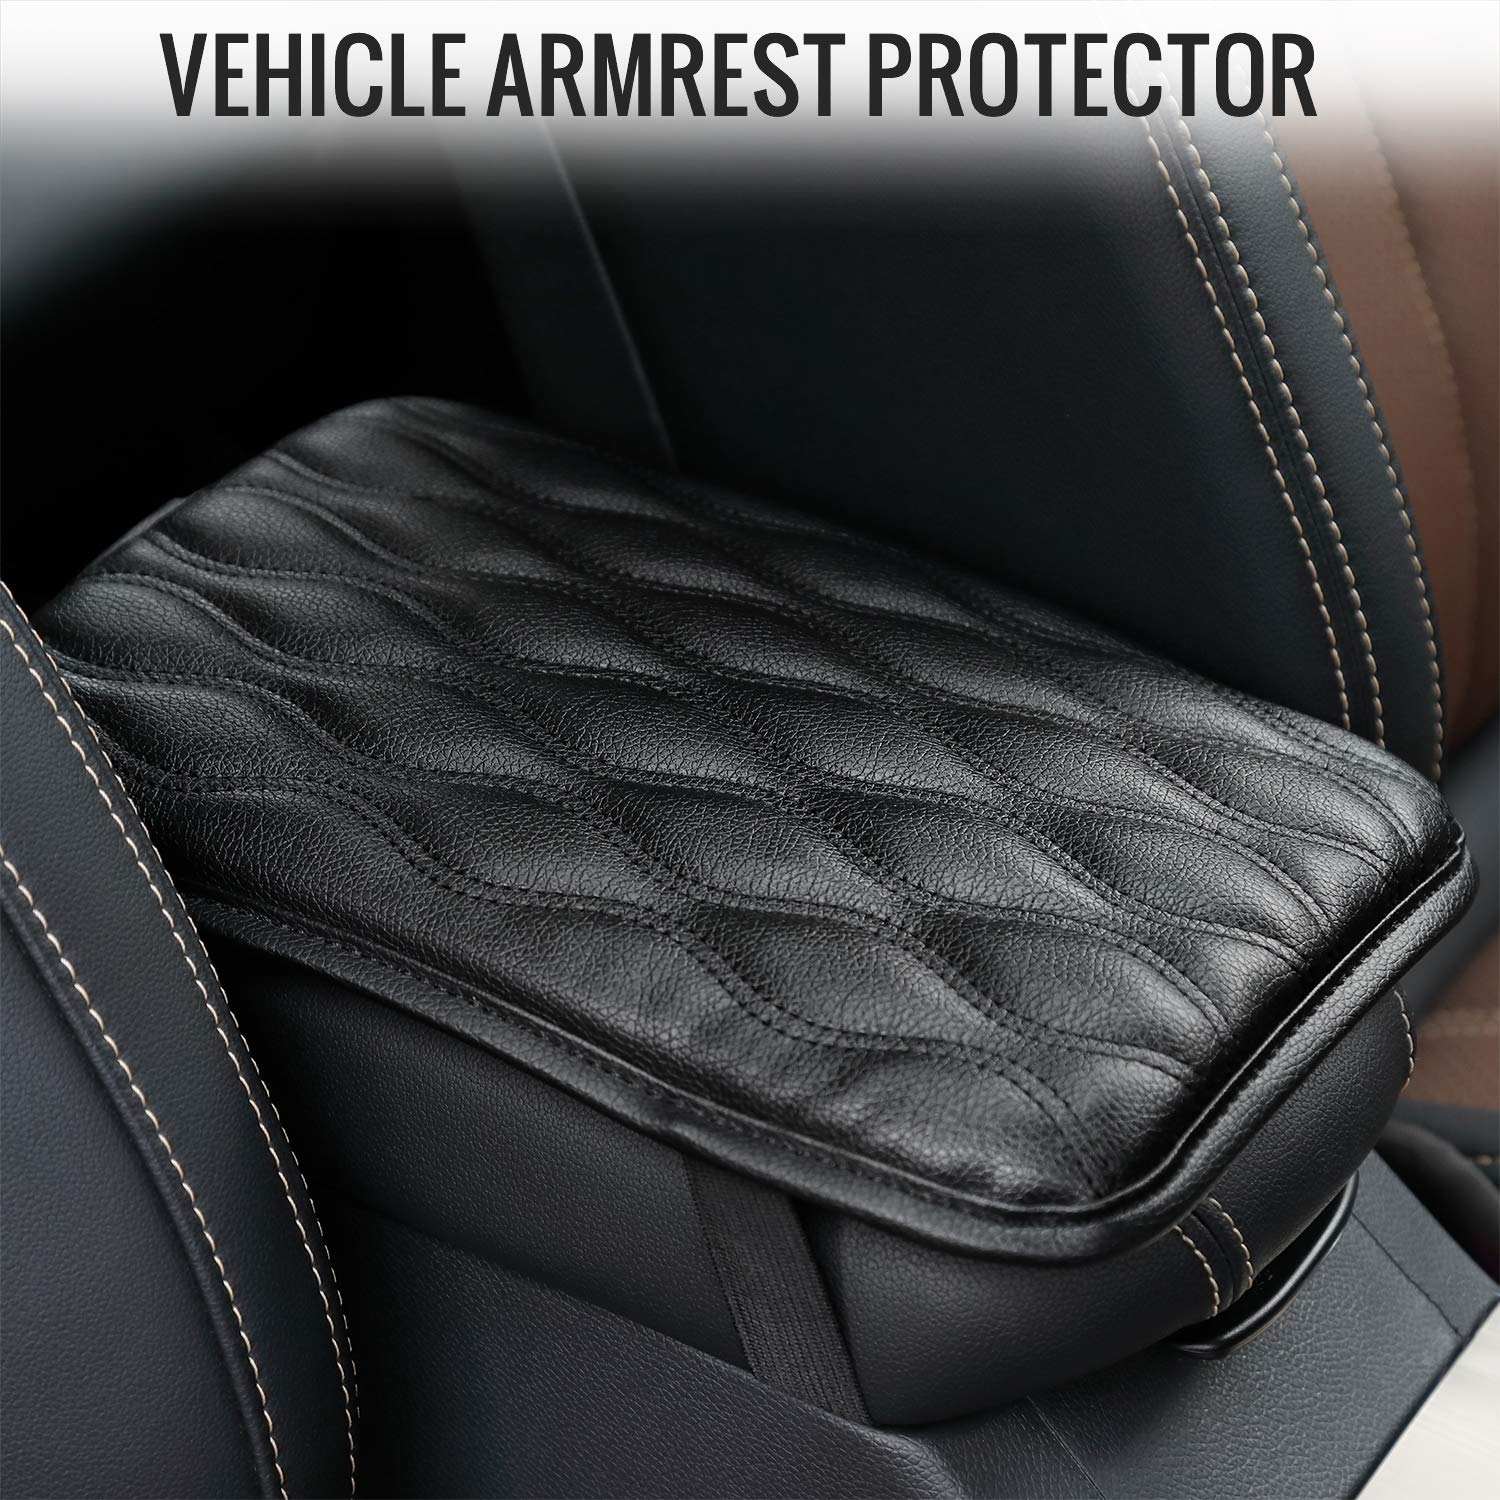 Peroptimist Universal Center Console Cover for Most Vehicle, SUV, Truck, Car, Waterproof Armrest Cover Center Console Pad, Car Armrest Seat Box Cover Protector, Enhances Your Armest Somfort - image 4 of 8